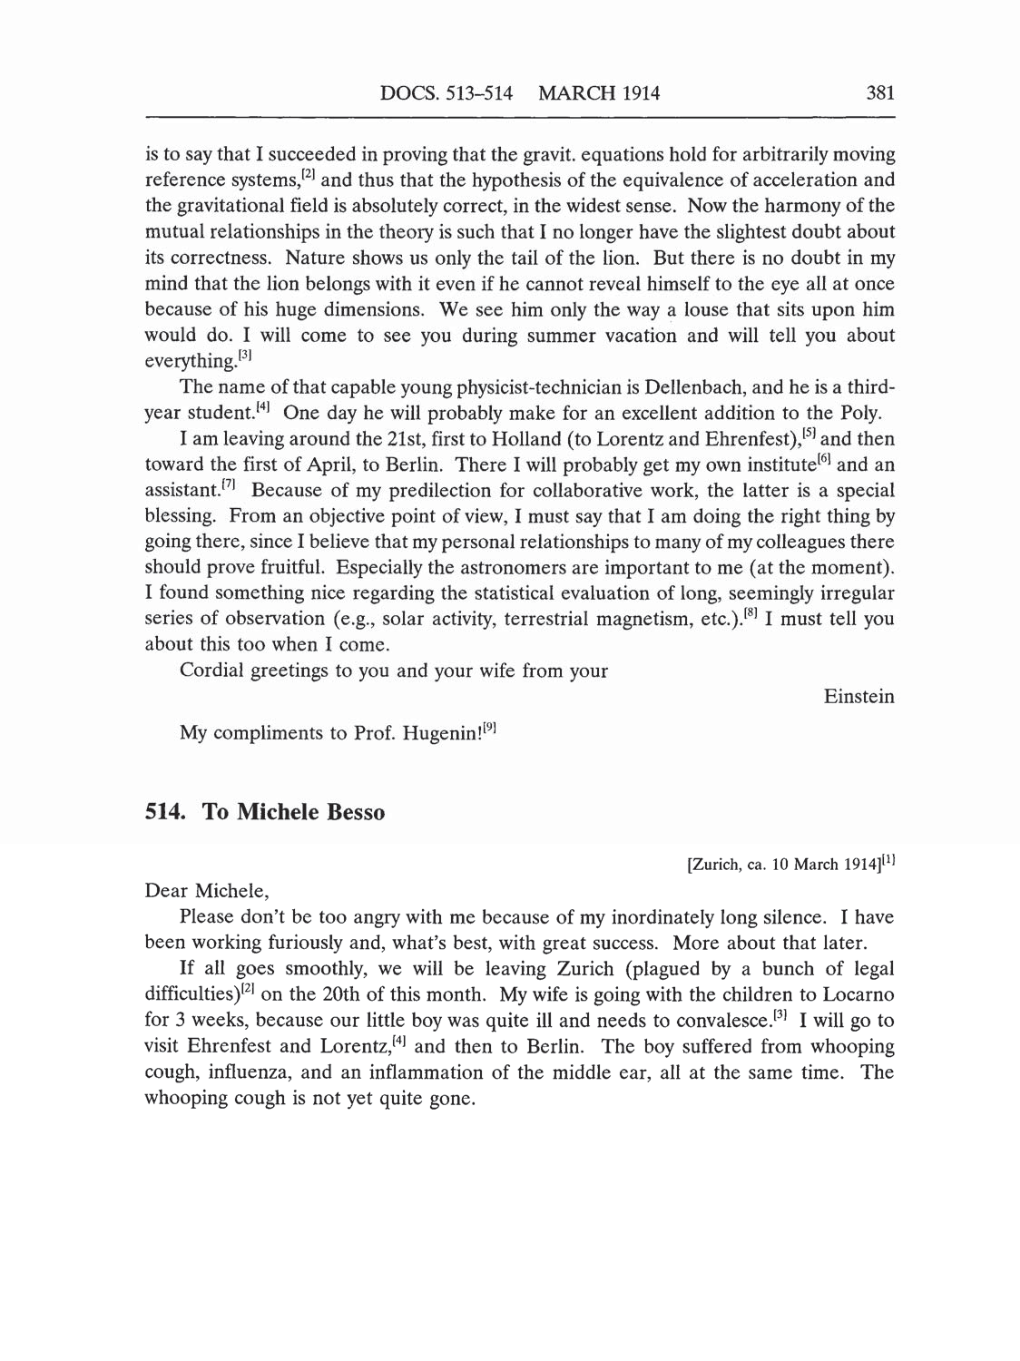 Volume 5: The Swiss Years: Correspondence, 1902-1914 (English translation supplement) page 381